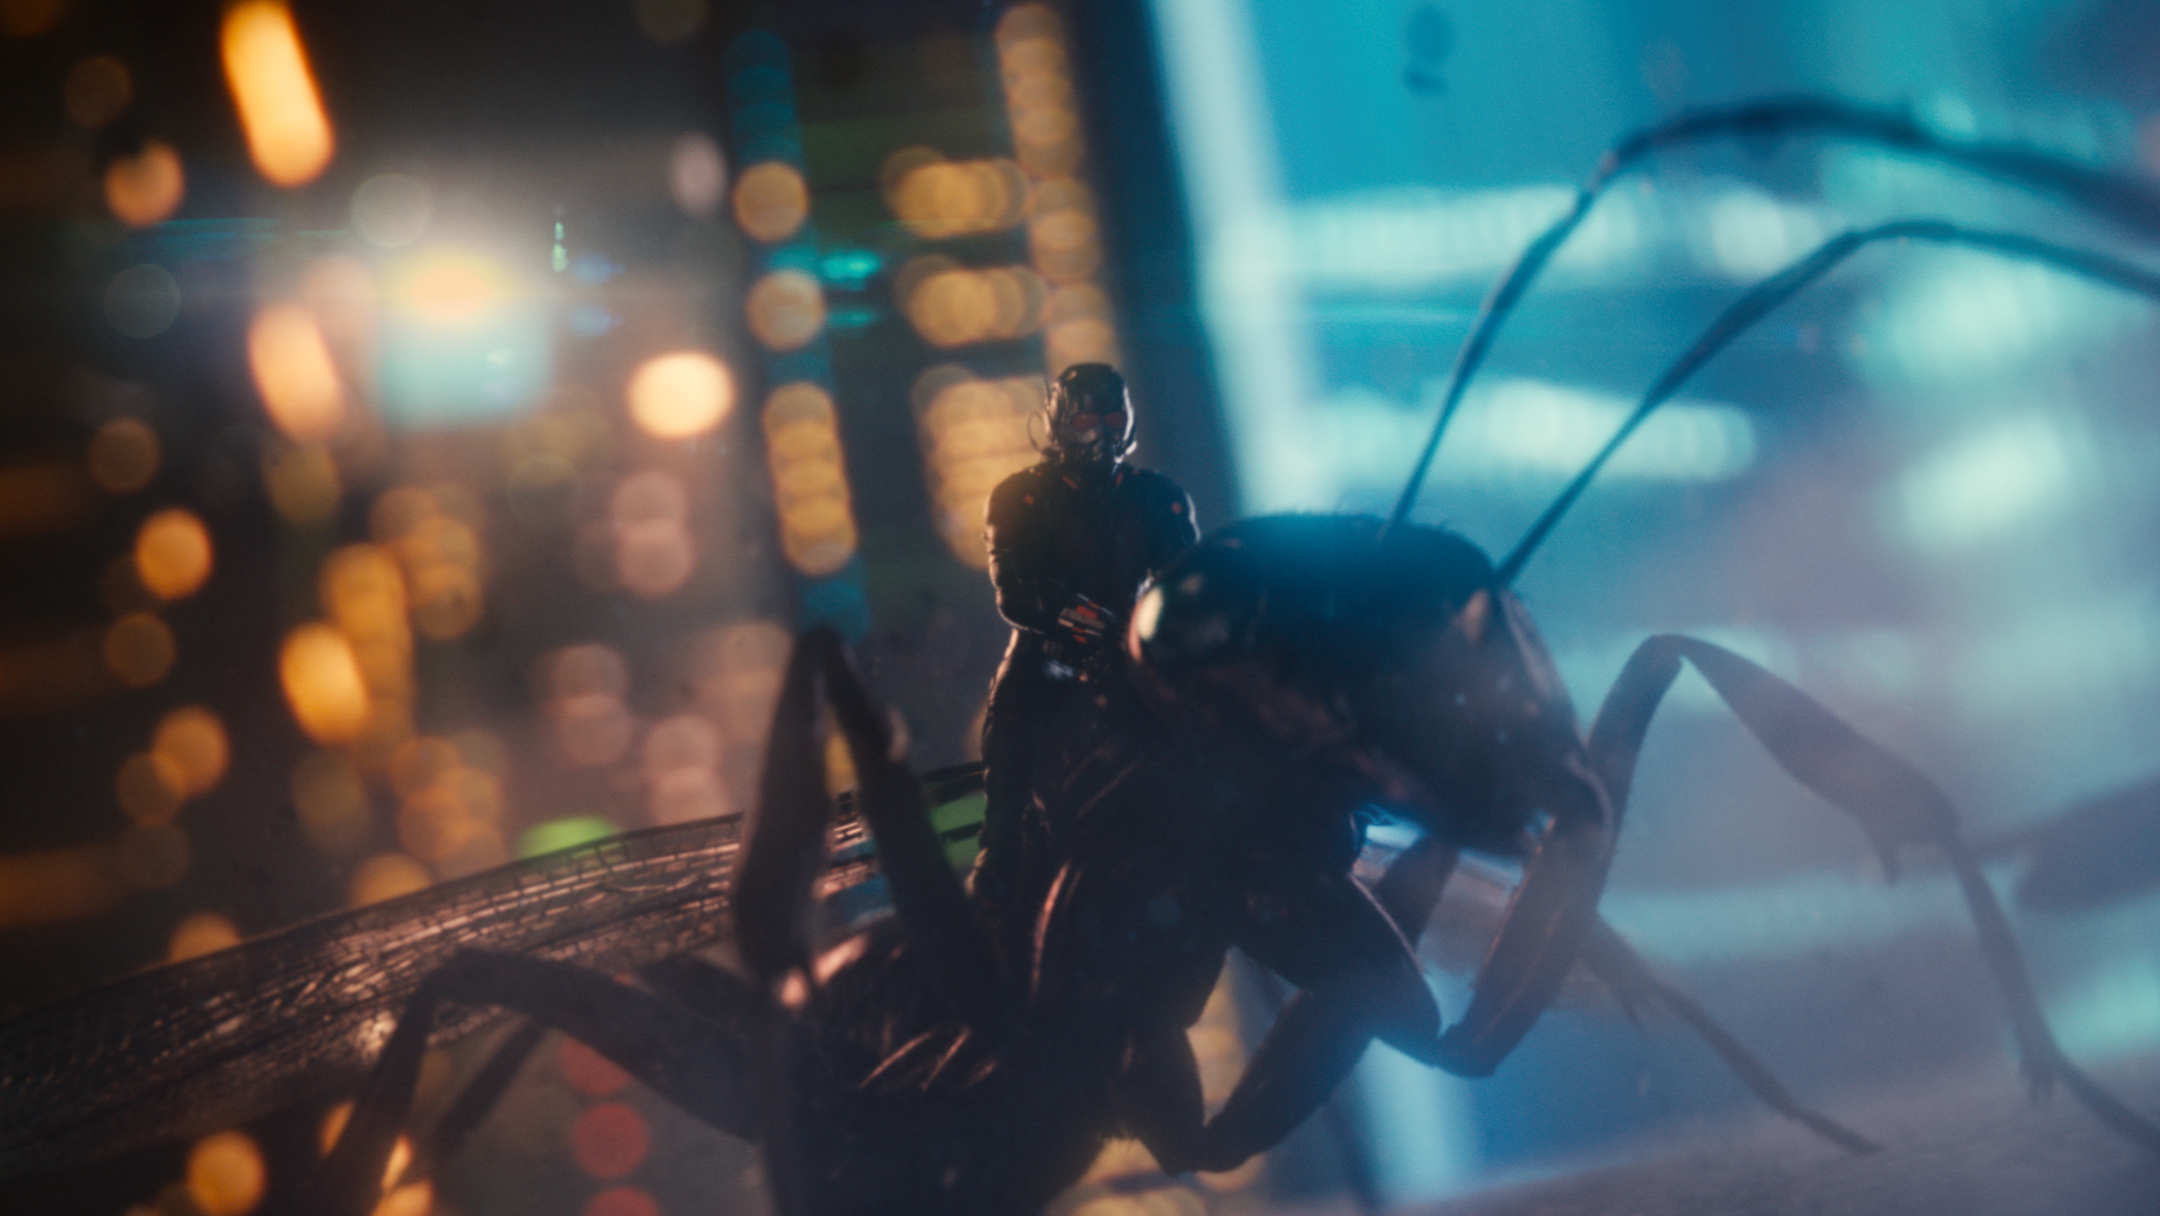 Ant Man Image And Concept Art Featuring Paul Rudd